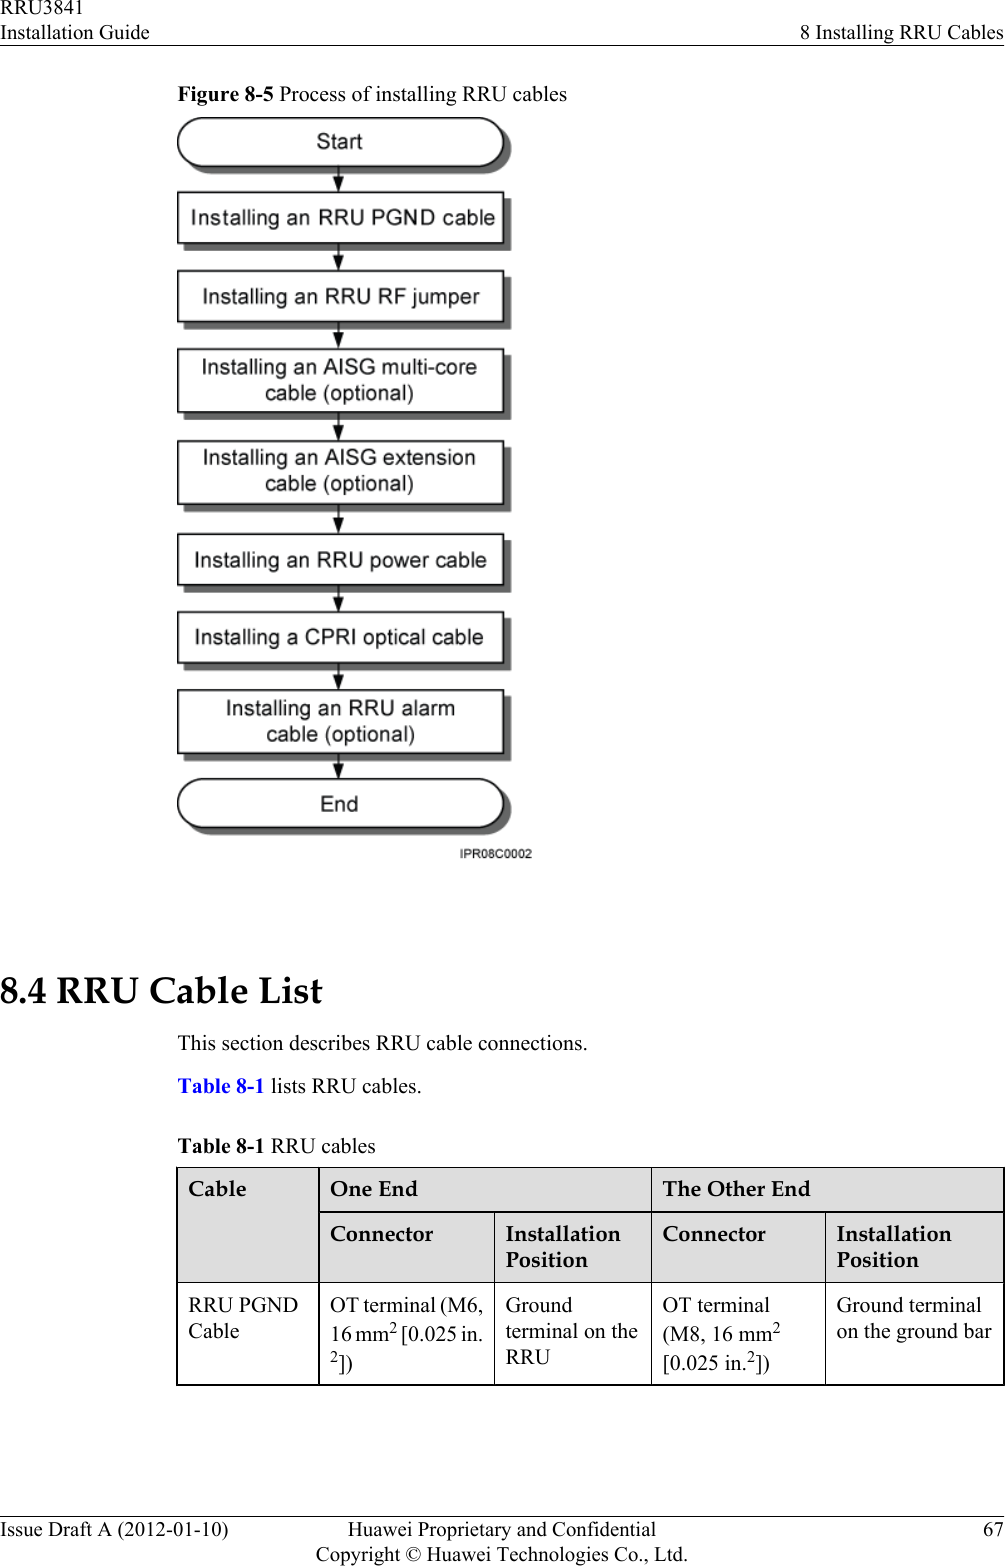 Figure 8-5 Process of installing RRU cables 8.4 RRU Cable ListThis section describes RRU cable connections.Table 8-1 lists RRU cables.Table 8-1 RRU cablesCable One End The Other EndConnector InstallationPositionConnector InstallationPositionRRU PGNDCableOT terminal (M6,16 mm2 [0.025 in.2])Groundterminal on theRRUOT terminal(M8, 16 mm2[0.025 in.2])Ground terminalon the ground barRRU3841Installation Guide 8 Installing RRU CablesIssue Draft A (2012-01-10) Huawei Proprietary and ConfidentialCopyright © Huawei Technologies Co., Ltd.67